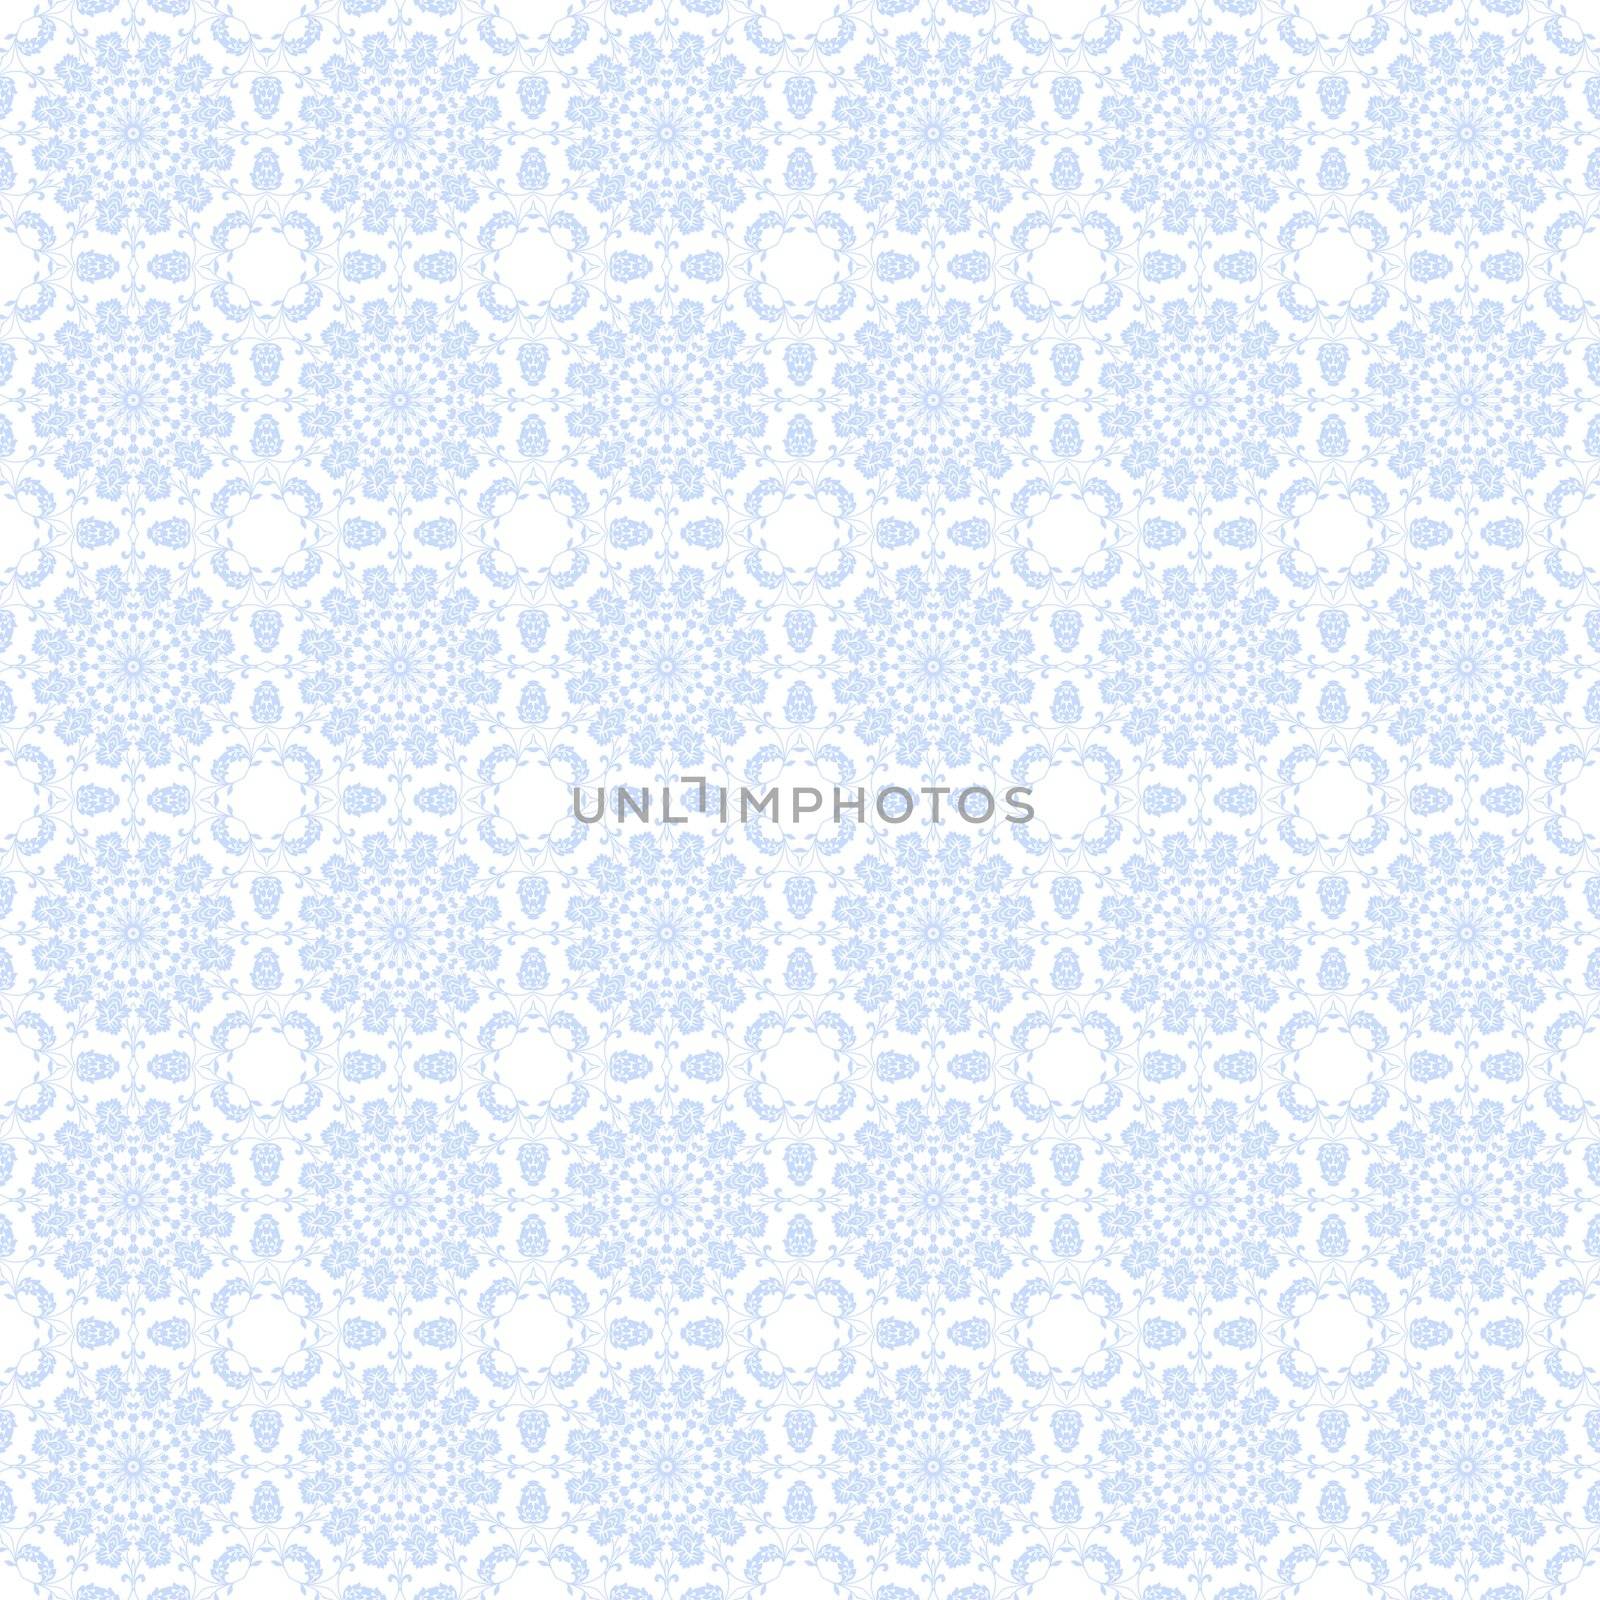 Baby blue vine elements combine in kaleidoscope patterns for a damask style pattern